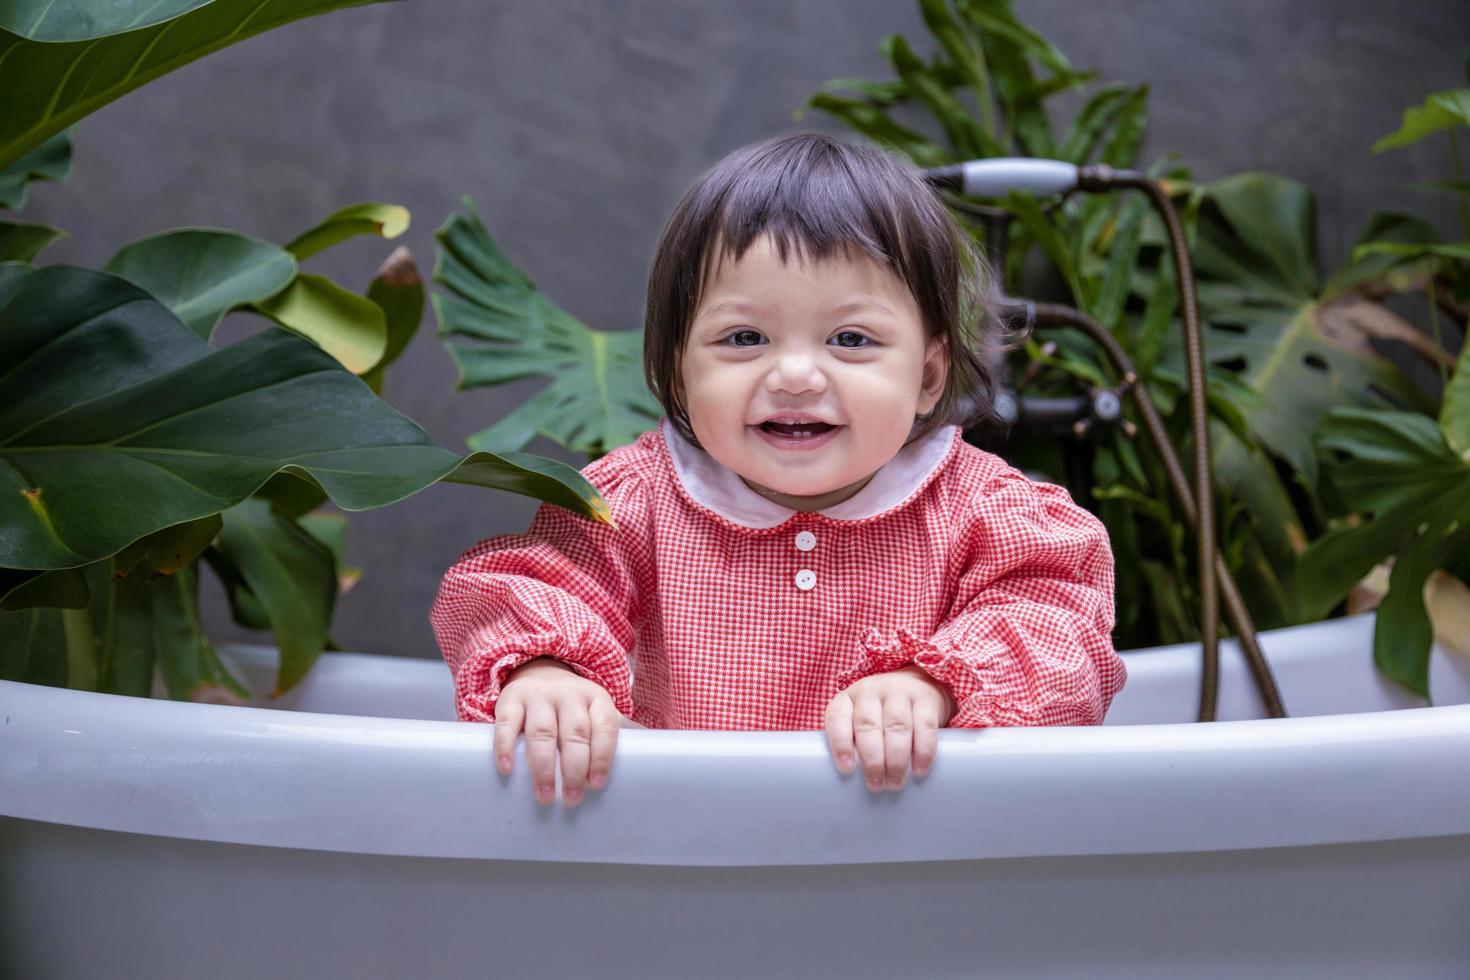 Caucasian little toddler baby girl smiling and playing inside the bathtub surrounding by tropical plant for better air purifying and sustainable home design concept photo